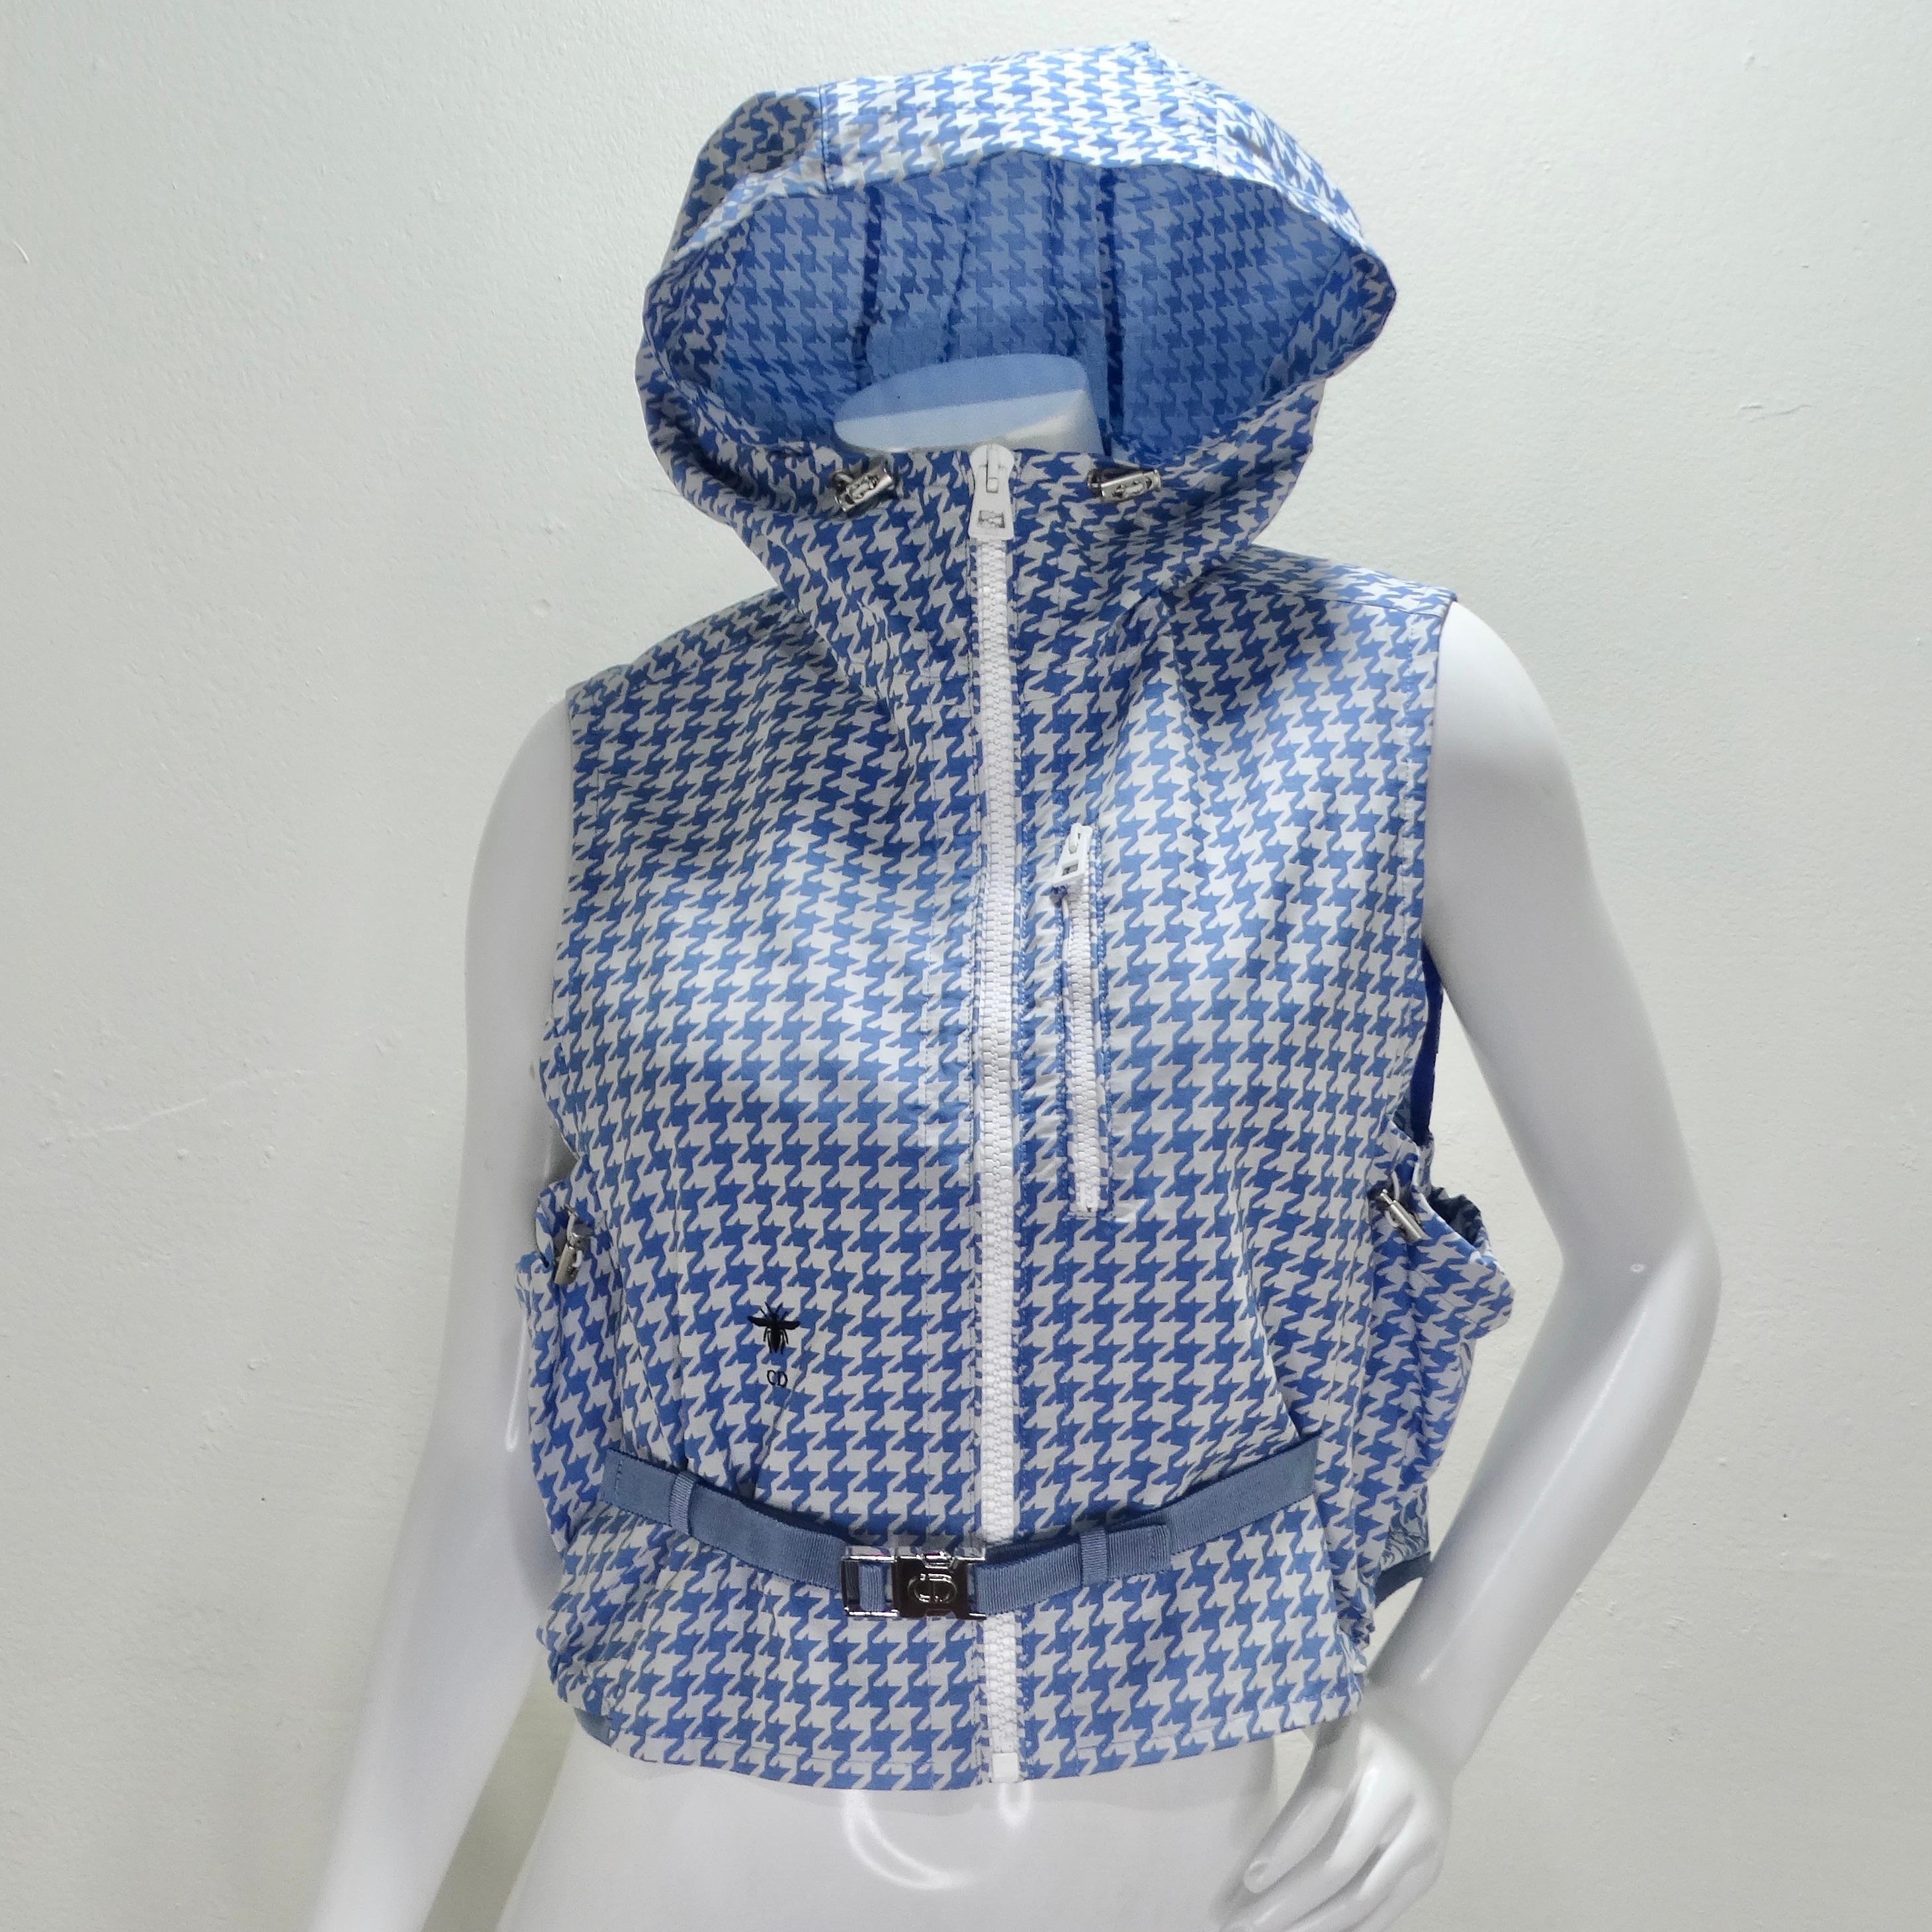 Introducing the Christian Dior Sleeveless Hooded Vest in White & Blue Houndstooth from the Cruise 2022 Collection by Maria Grazia Chiuri. This striking piece features a sports-inspired design that combines functionality with high fashion.

Crafted